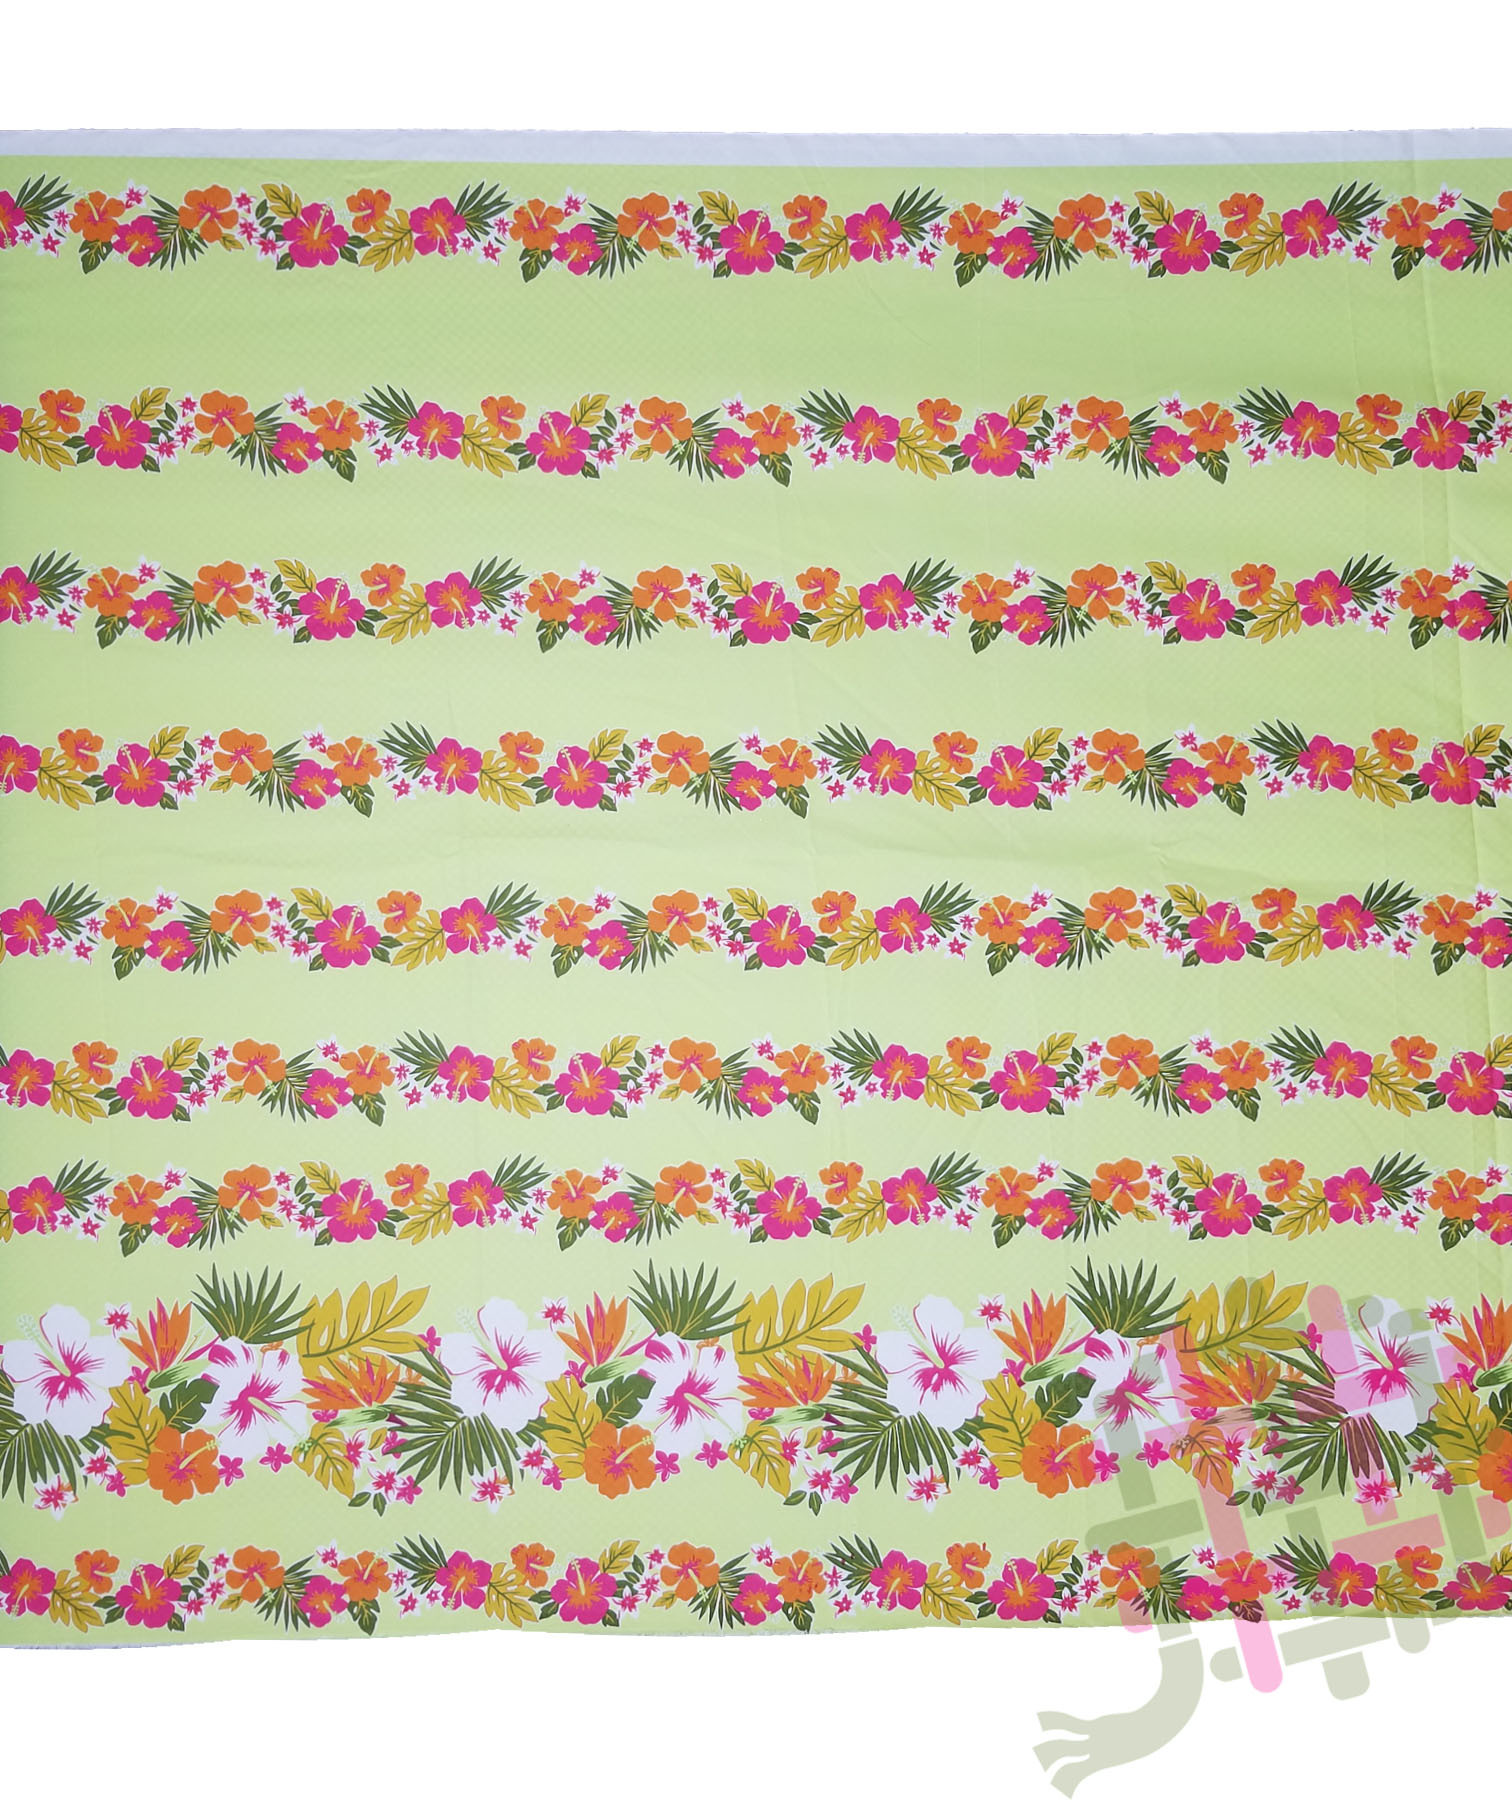 DeeArna Export's Fancy Floral Digital Prints on 6MM Checks Silk Unstitch Fabric Material for Women's Clothing (58